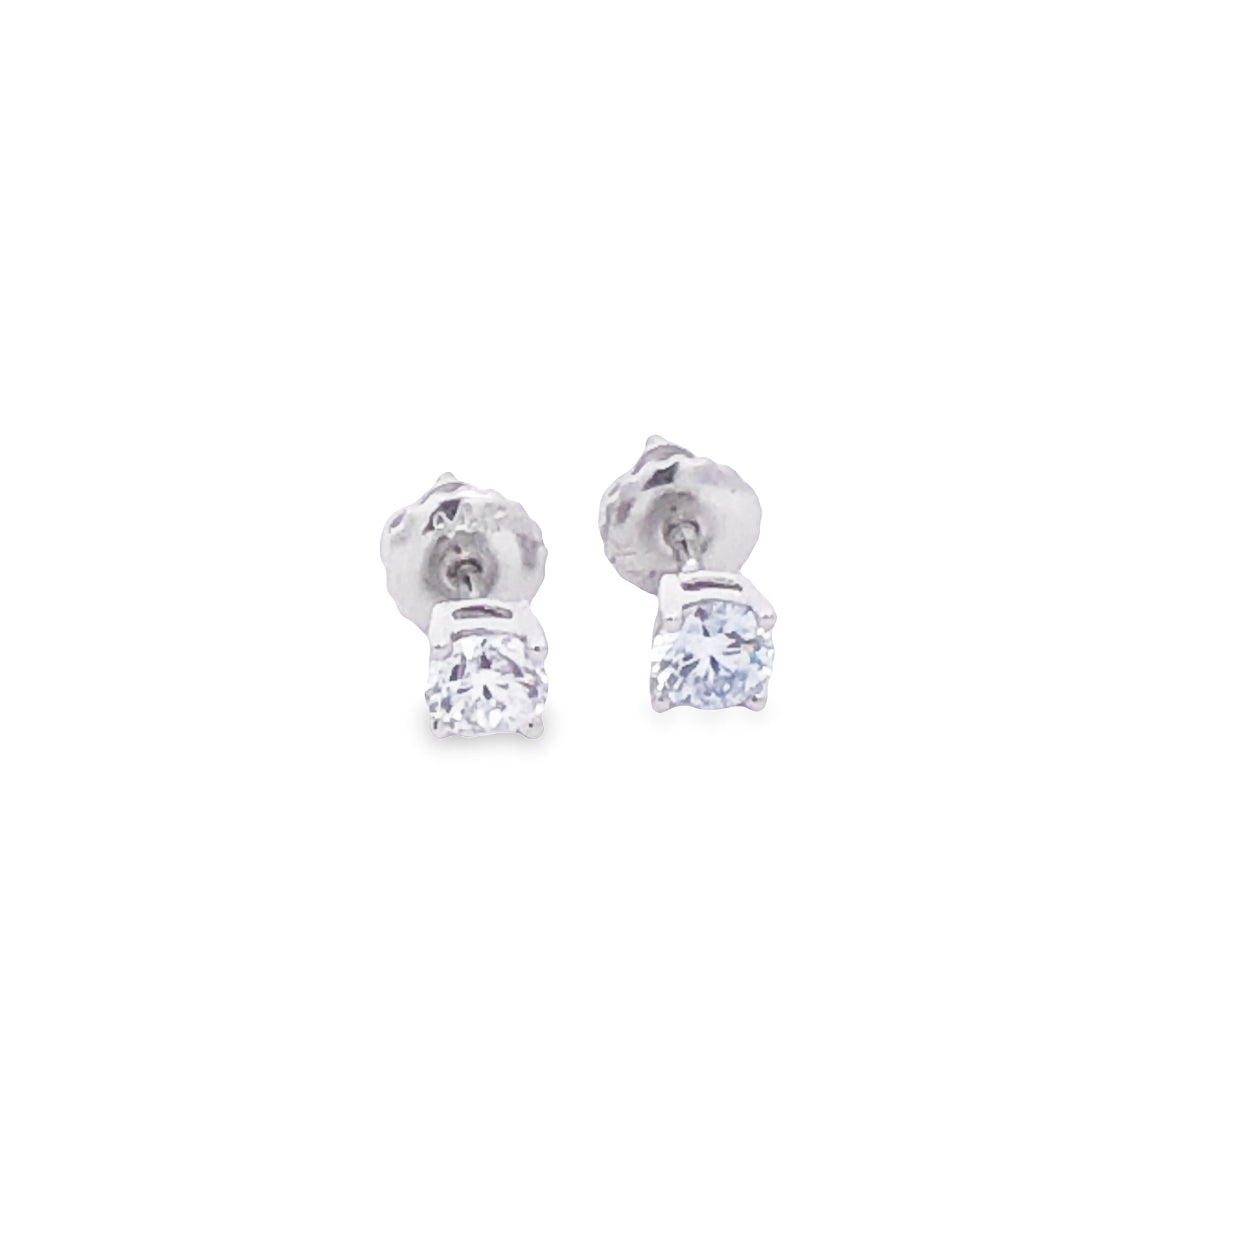 14Ct White Gold LAB GROWN Diamond Soiltaire Stud Earrings Set With A 0.25Ct E VS Has Cert. TDW=0.50CT